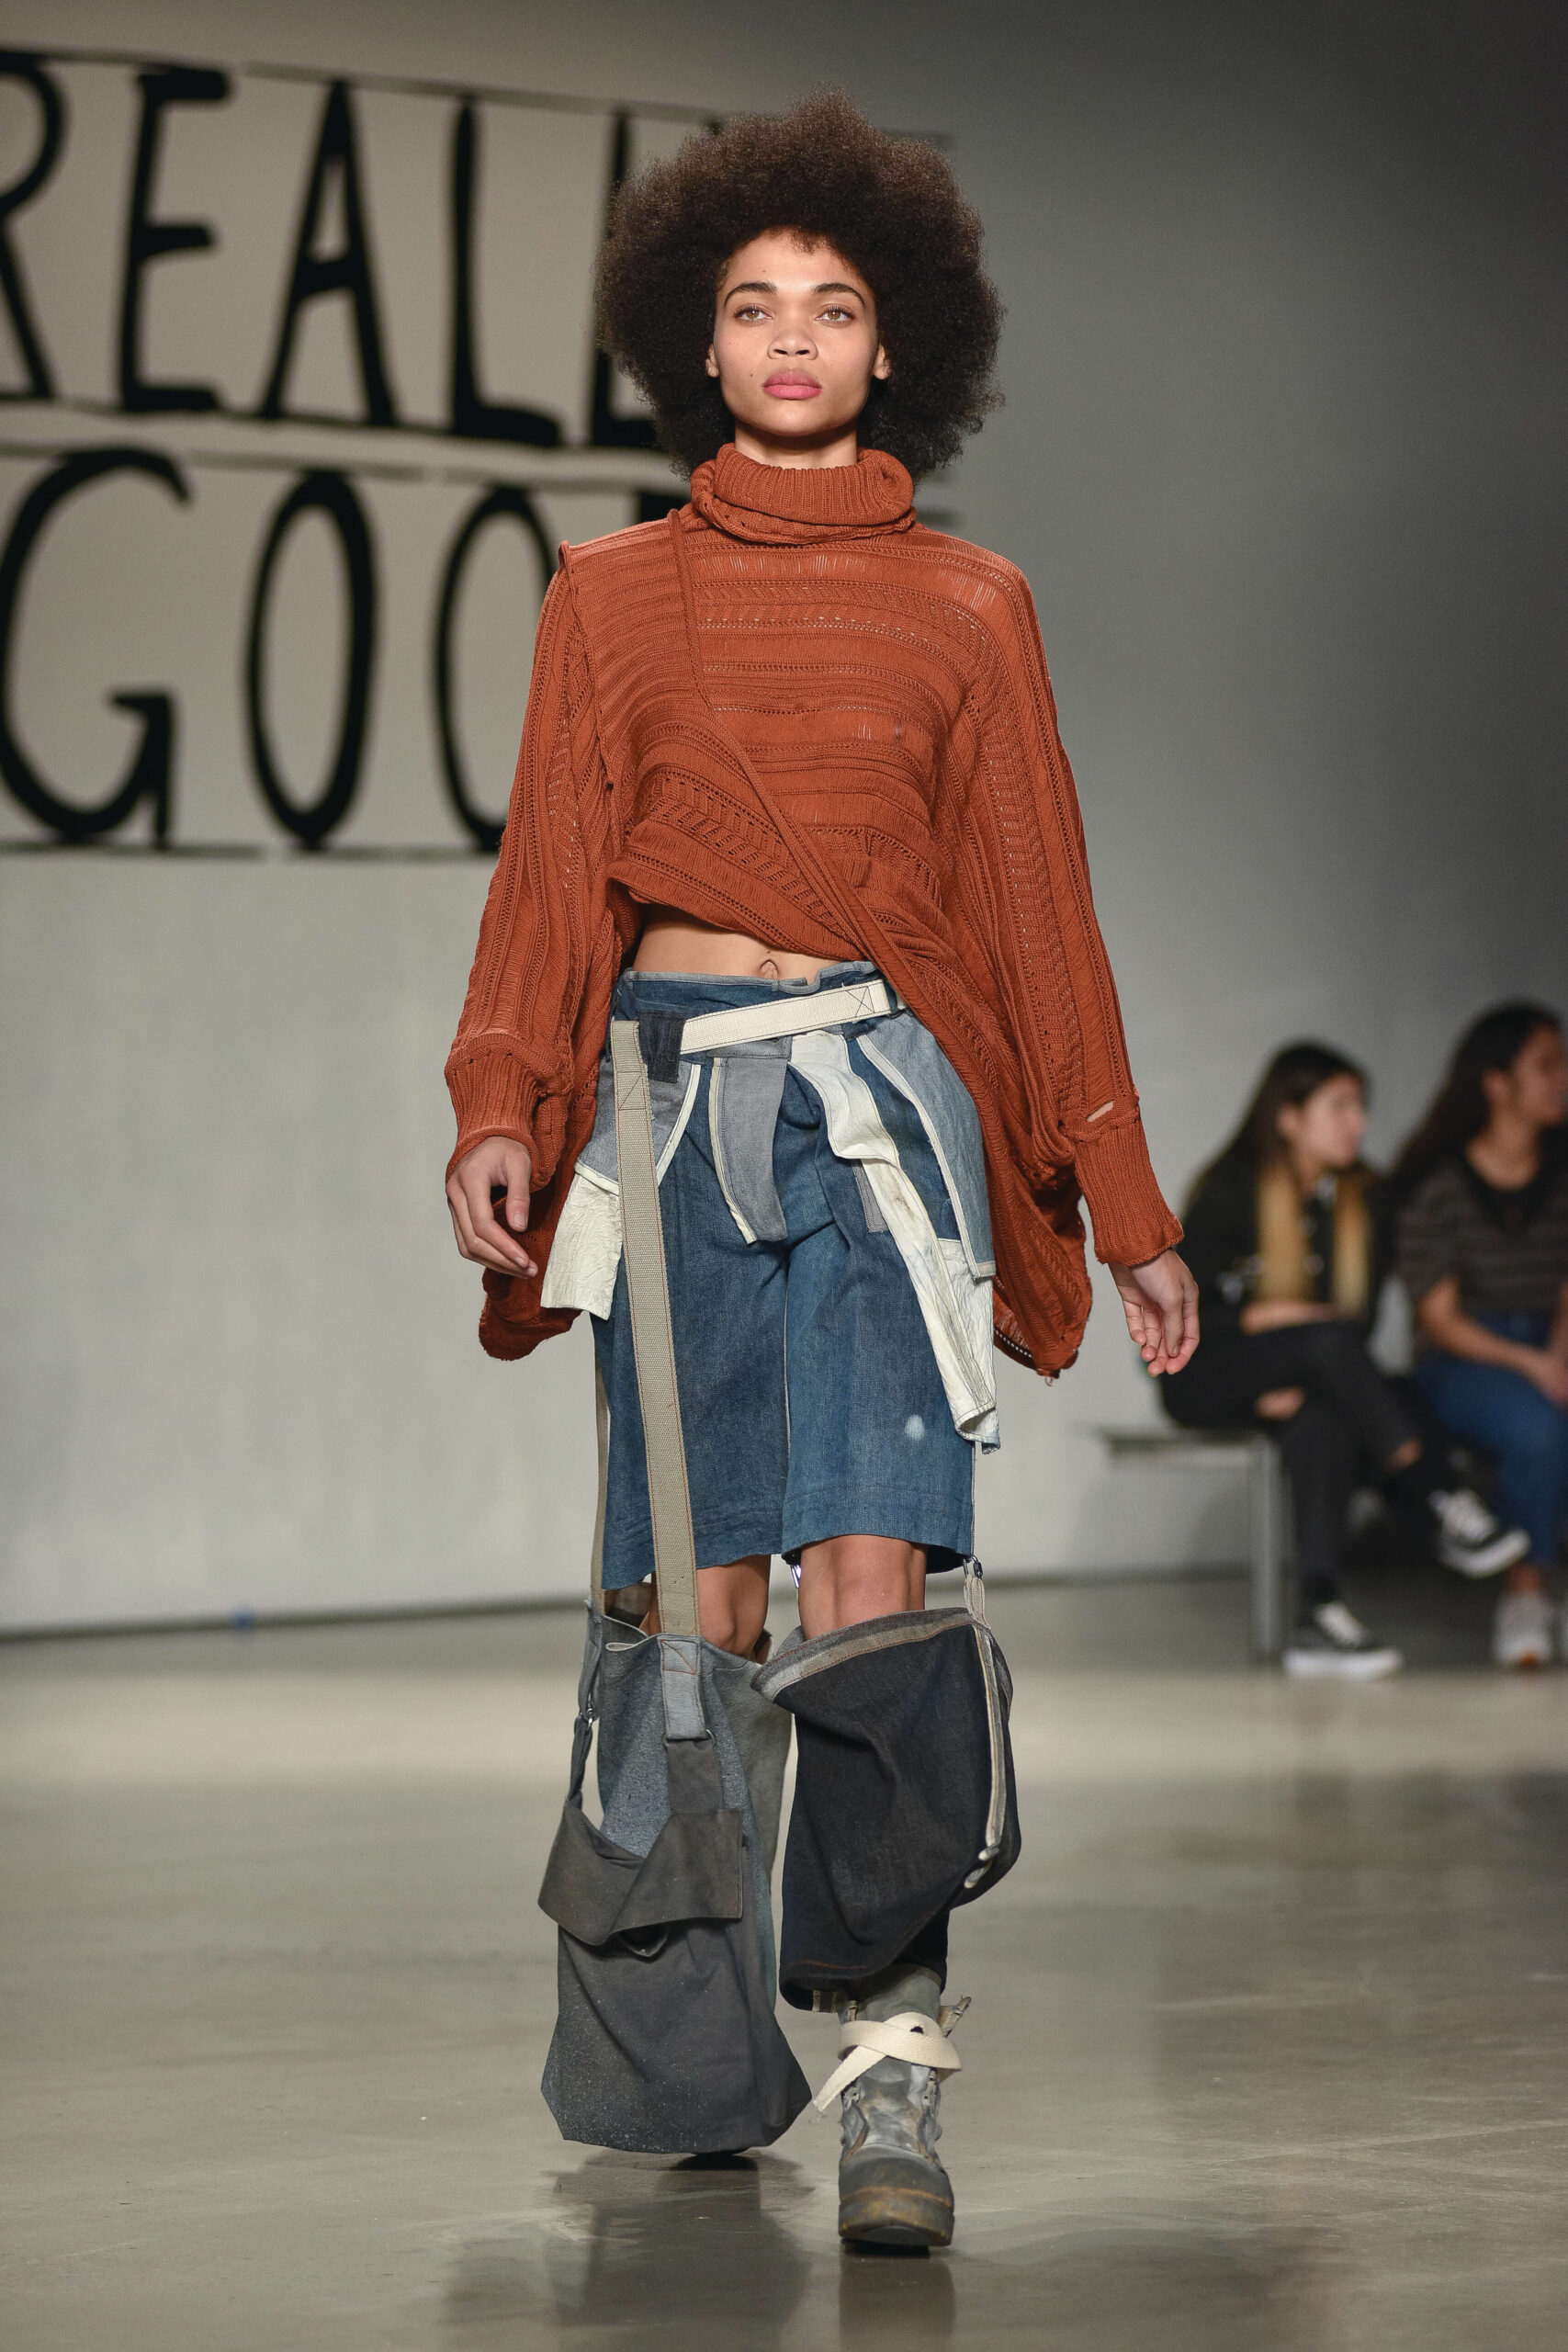 A model walks down a runway wearing deconstructed jeans and a long, draping sweater revealing part of her waist.